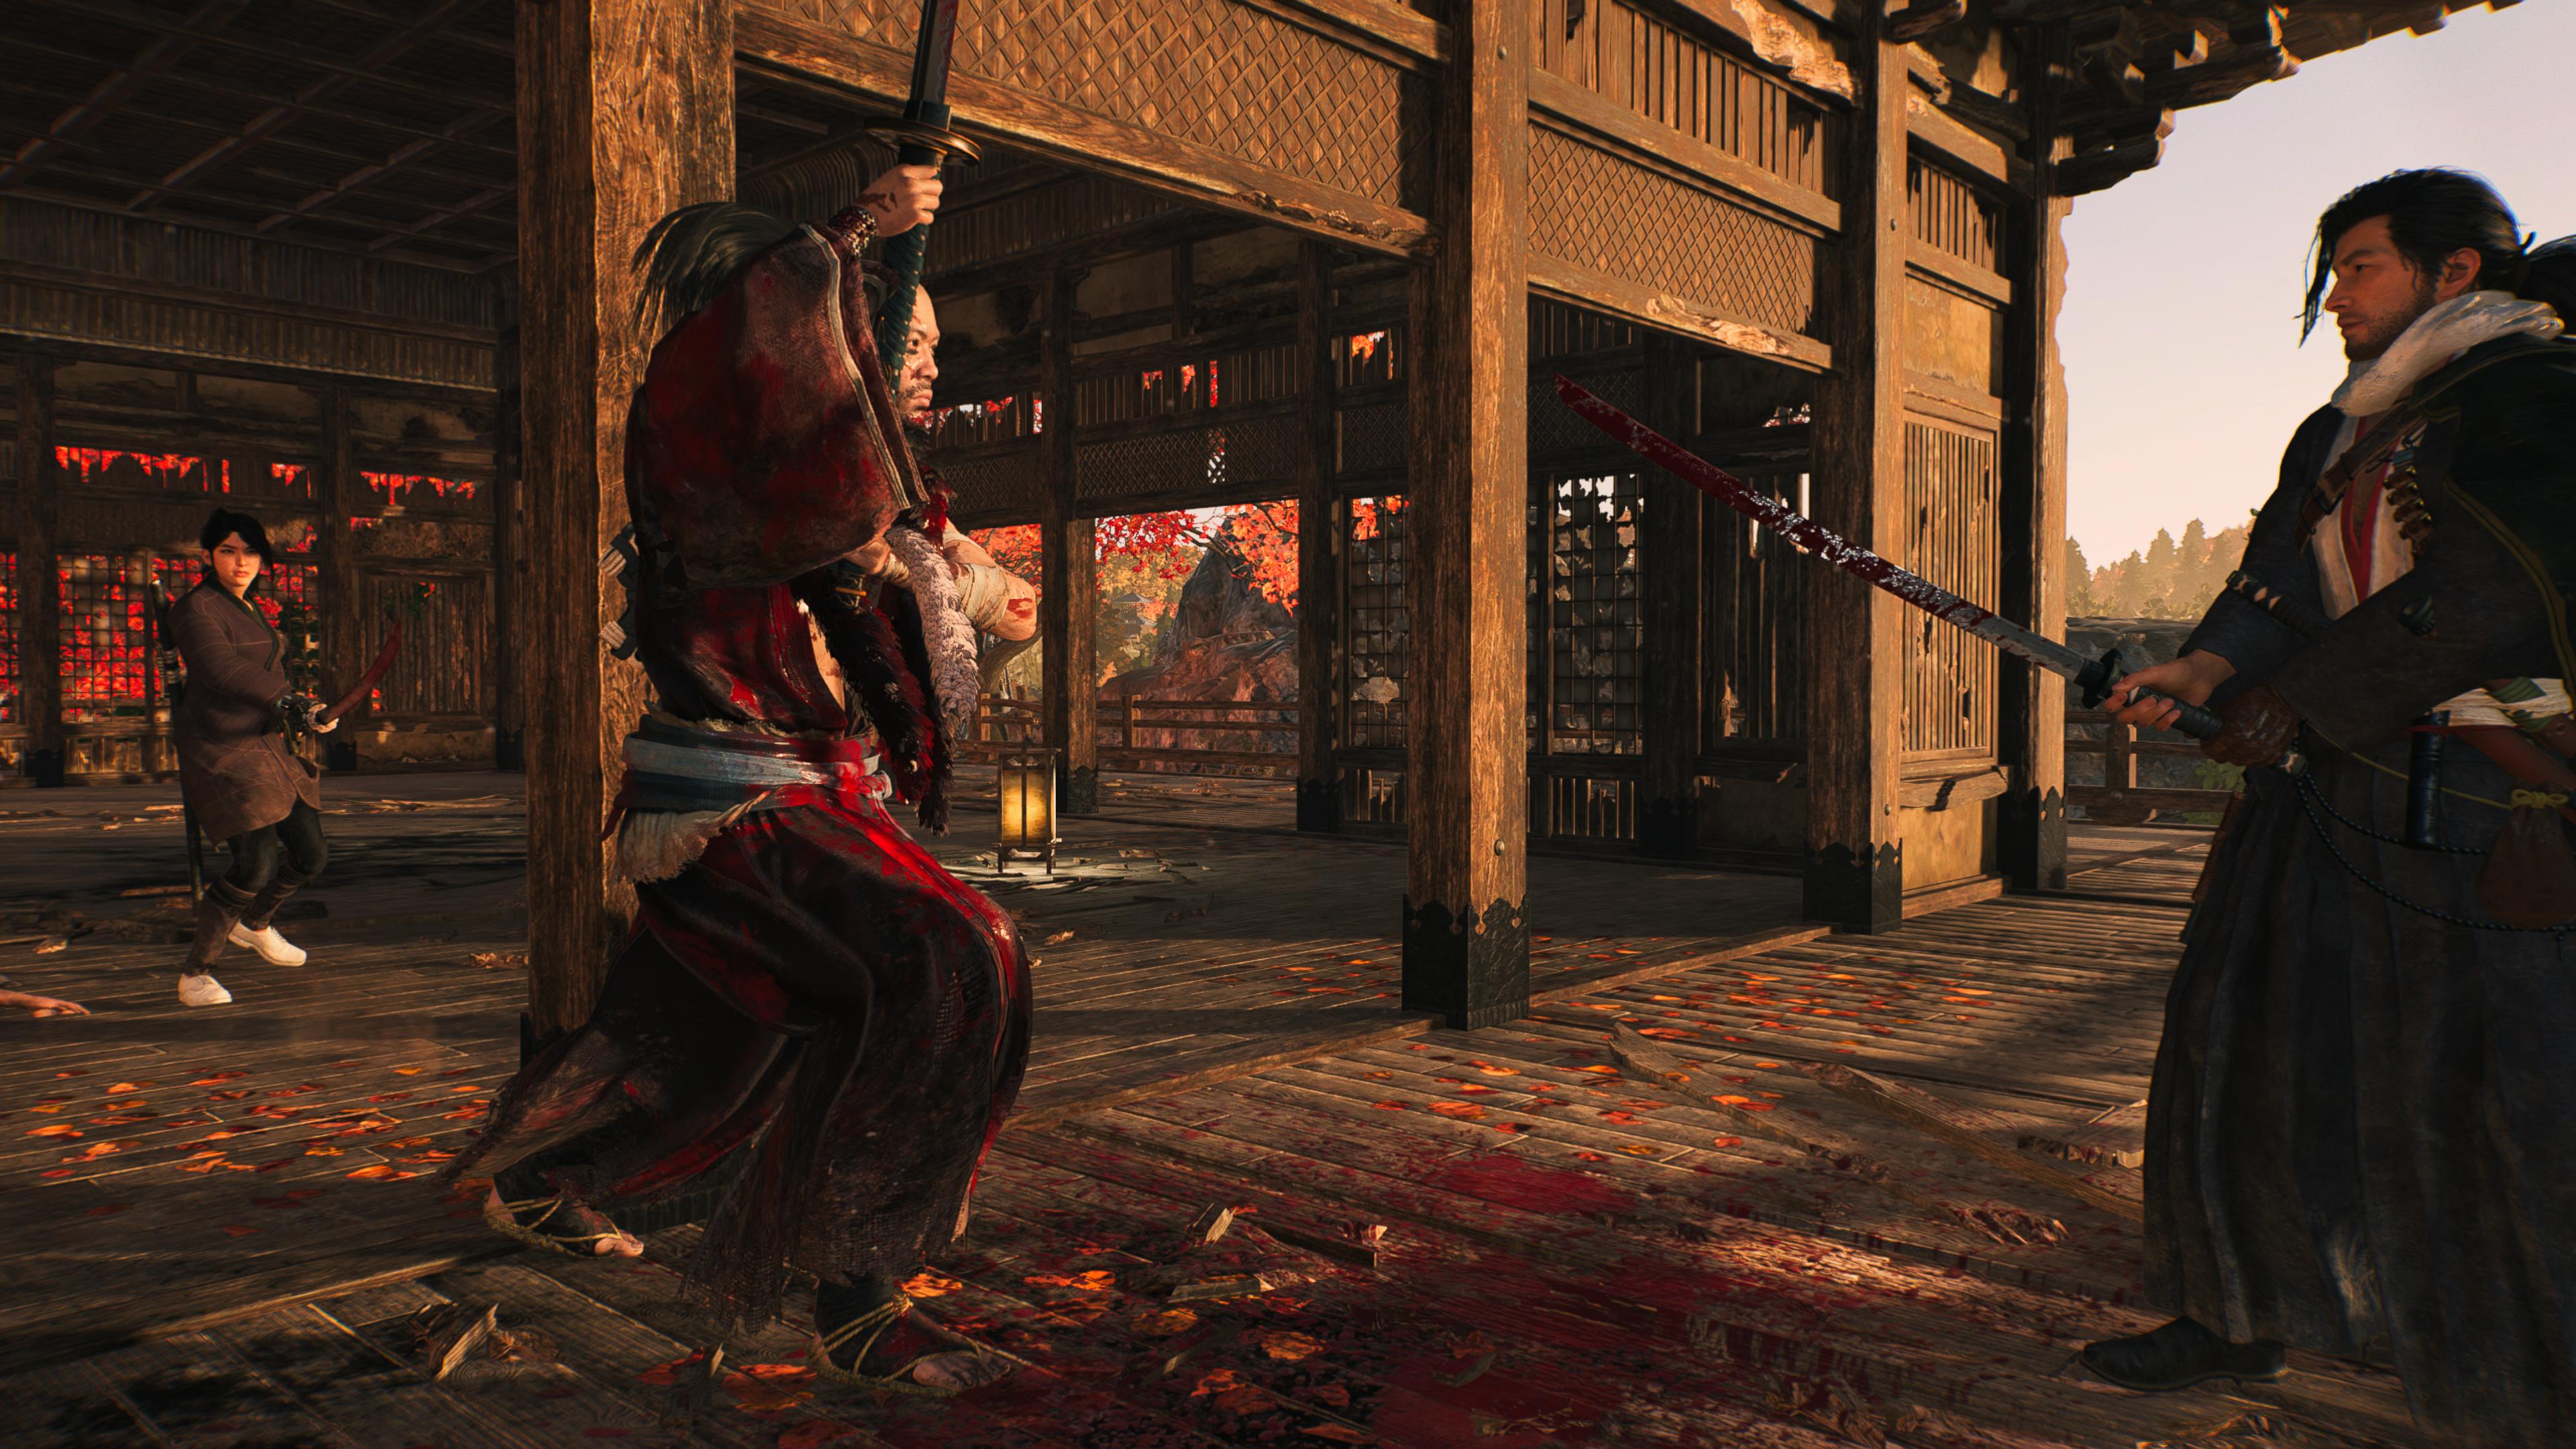 Reseña: Rise of the Ronin, ¿Vale la pena? 34